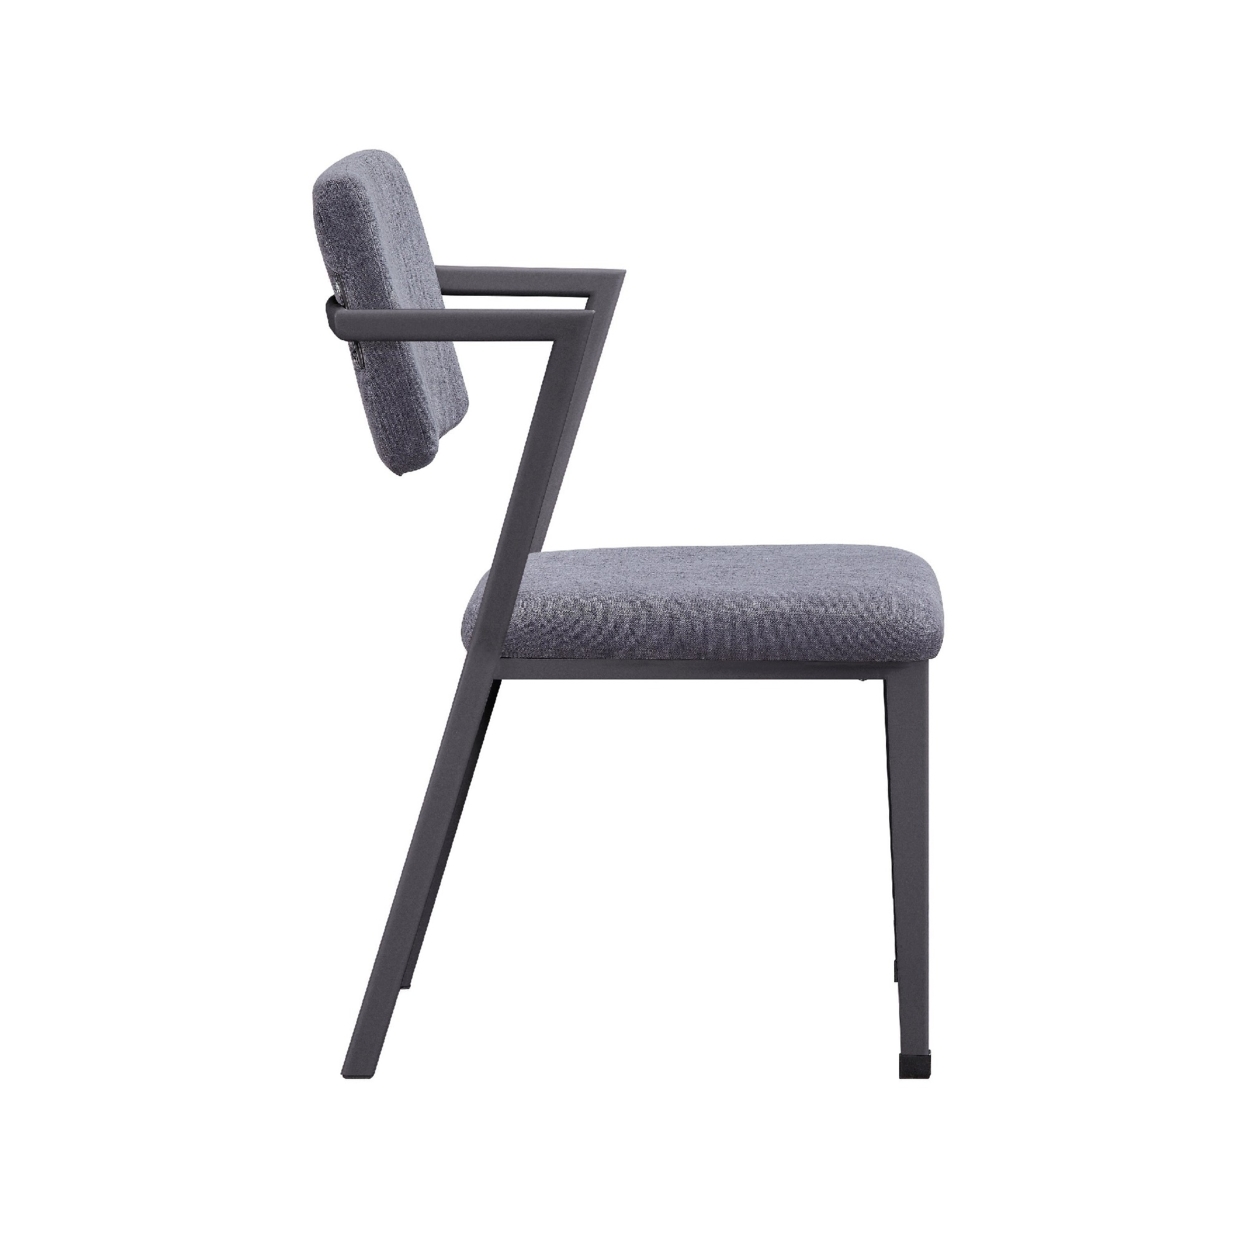 Fabric Upholstered Metal Dining Chair, Set Of 2, Gray And Black- Saltoro Sherpi